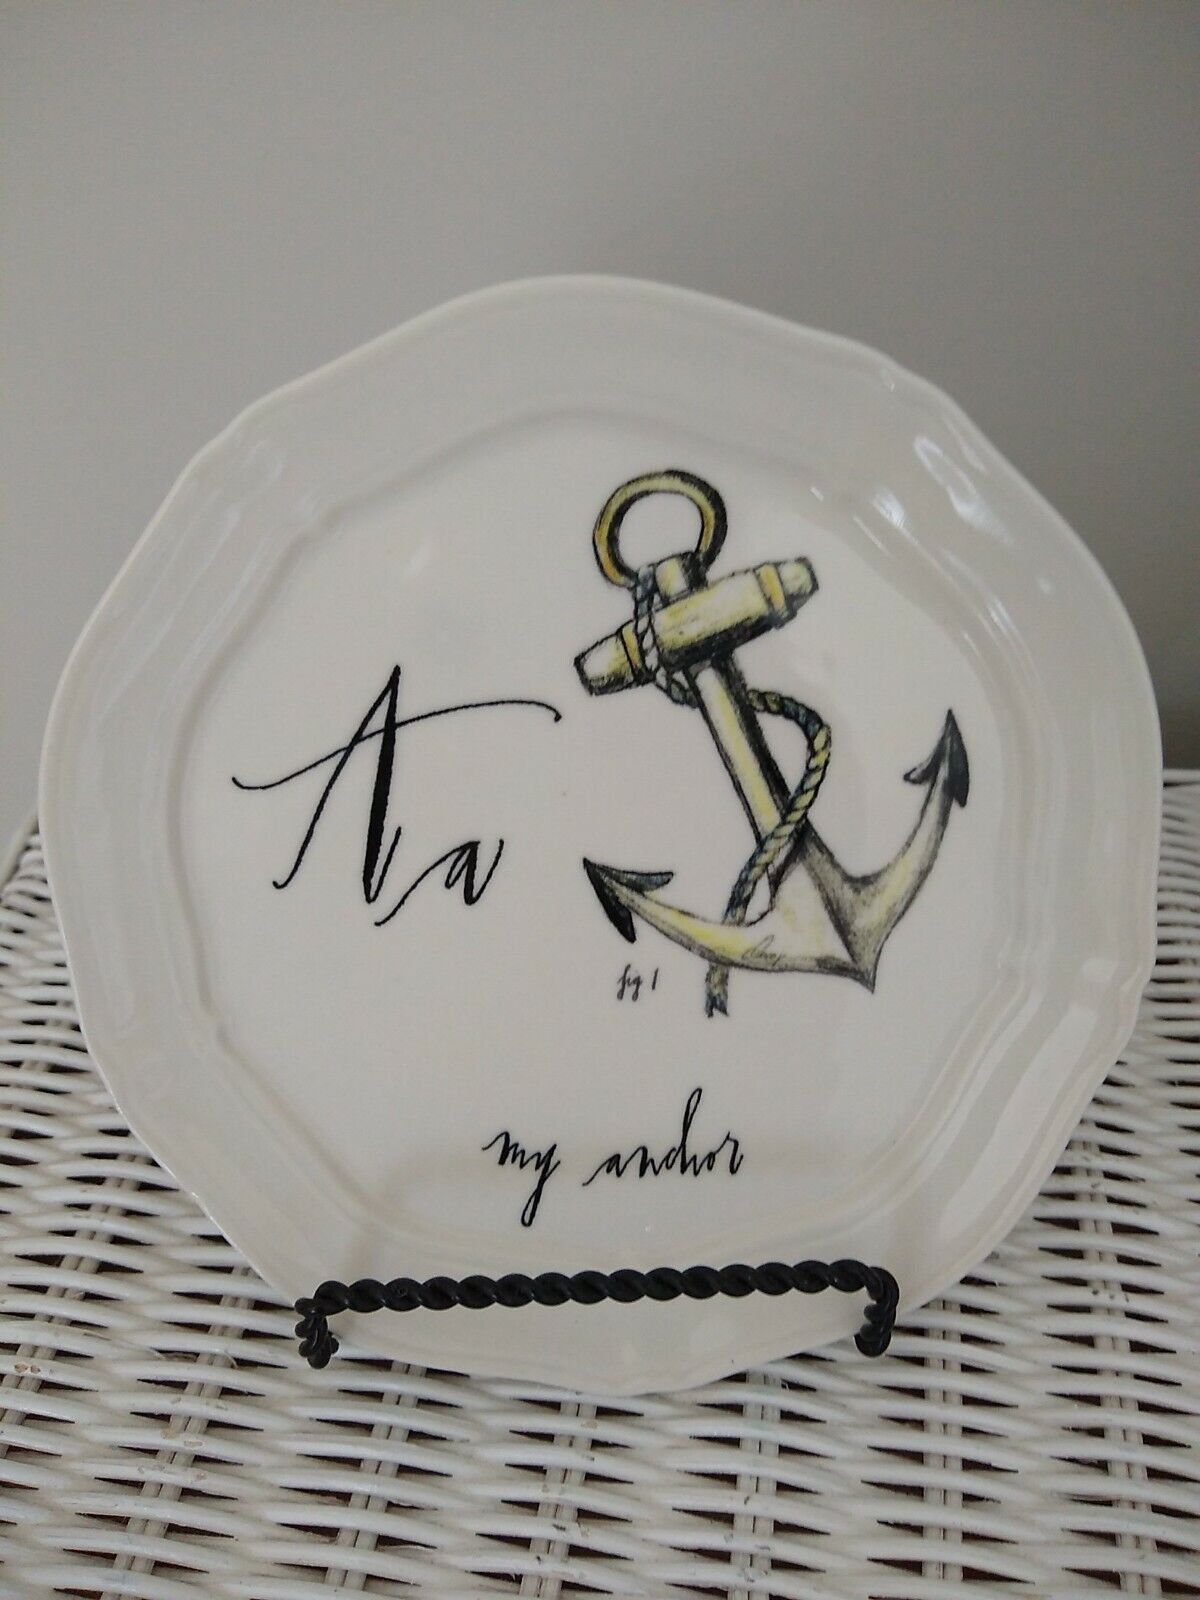 SOLD OUT~LINEA CARTA ANTHROPOLOGIE Alphabet Plate A-my anchor~NWT~D. Pyari